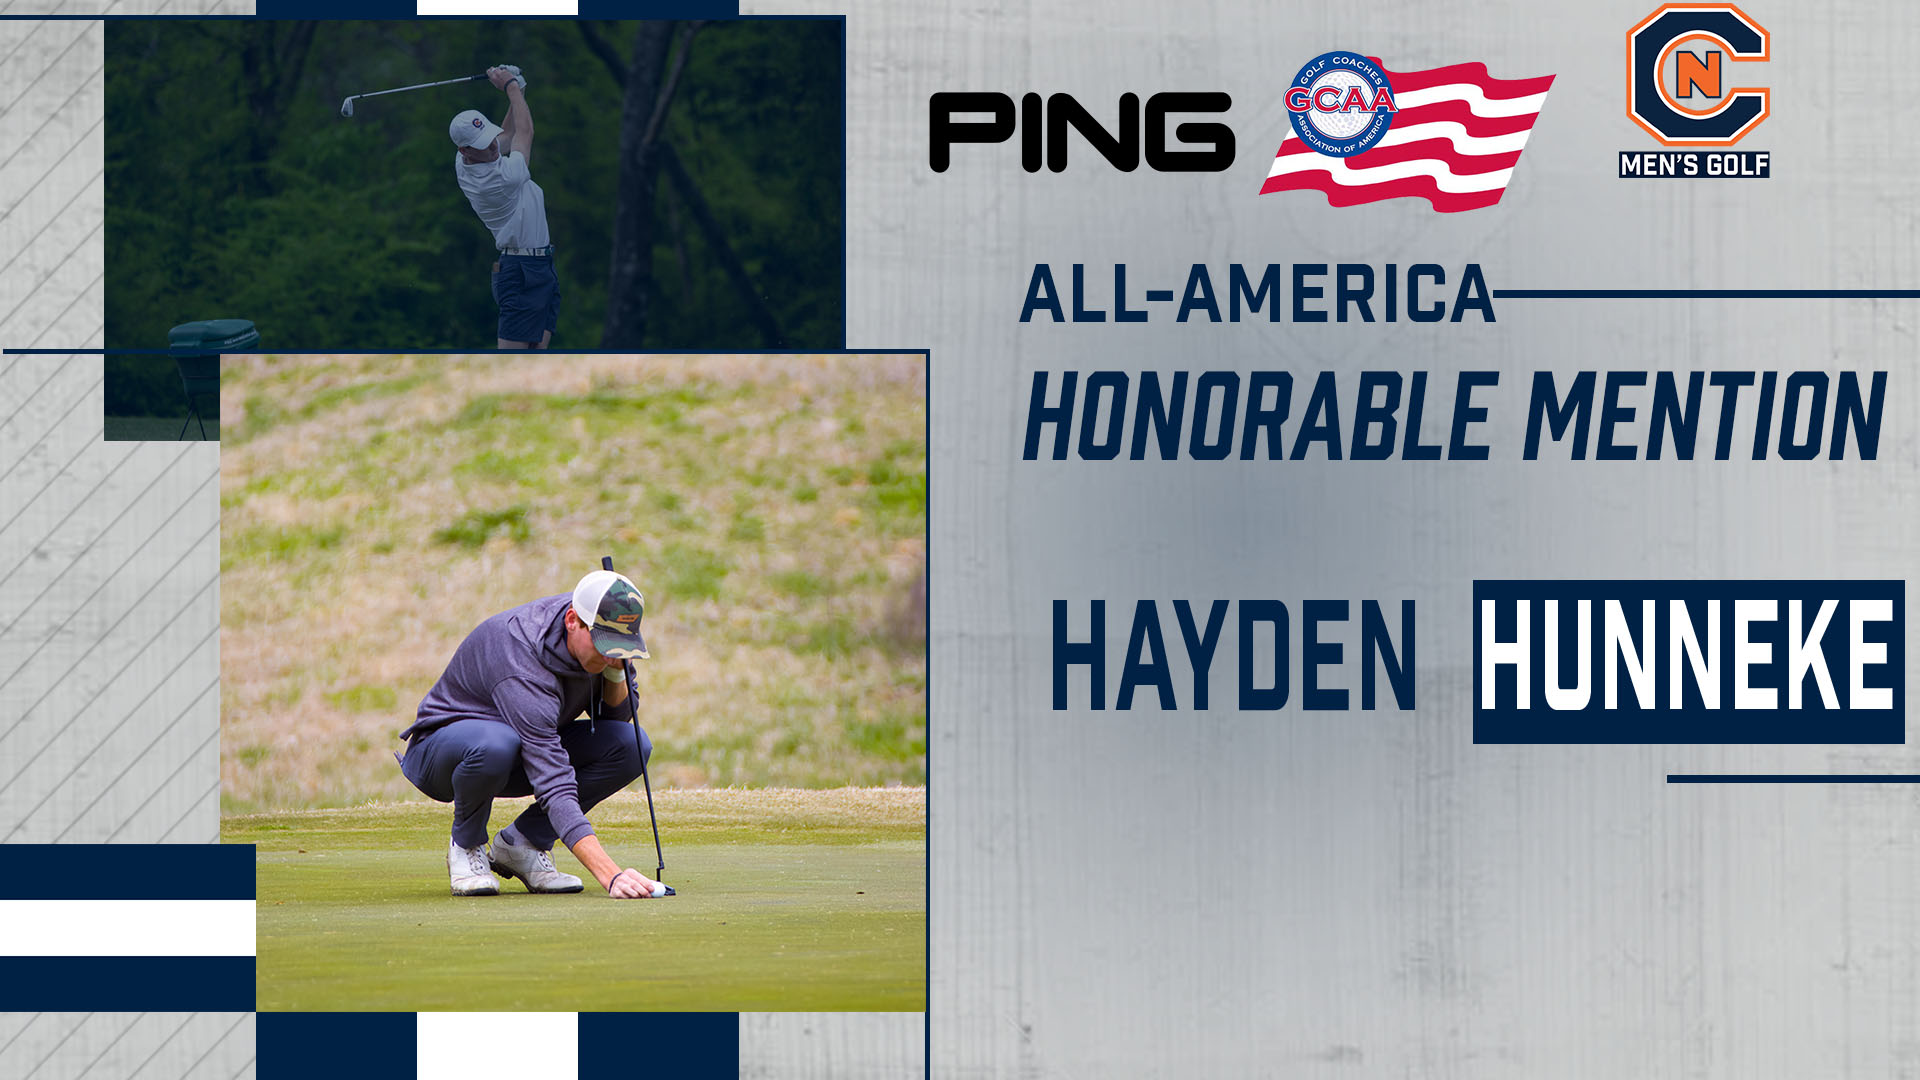 Hunneke nets Ping All-America Honorable Mention honor